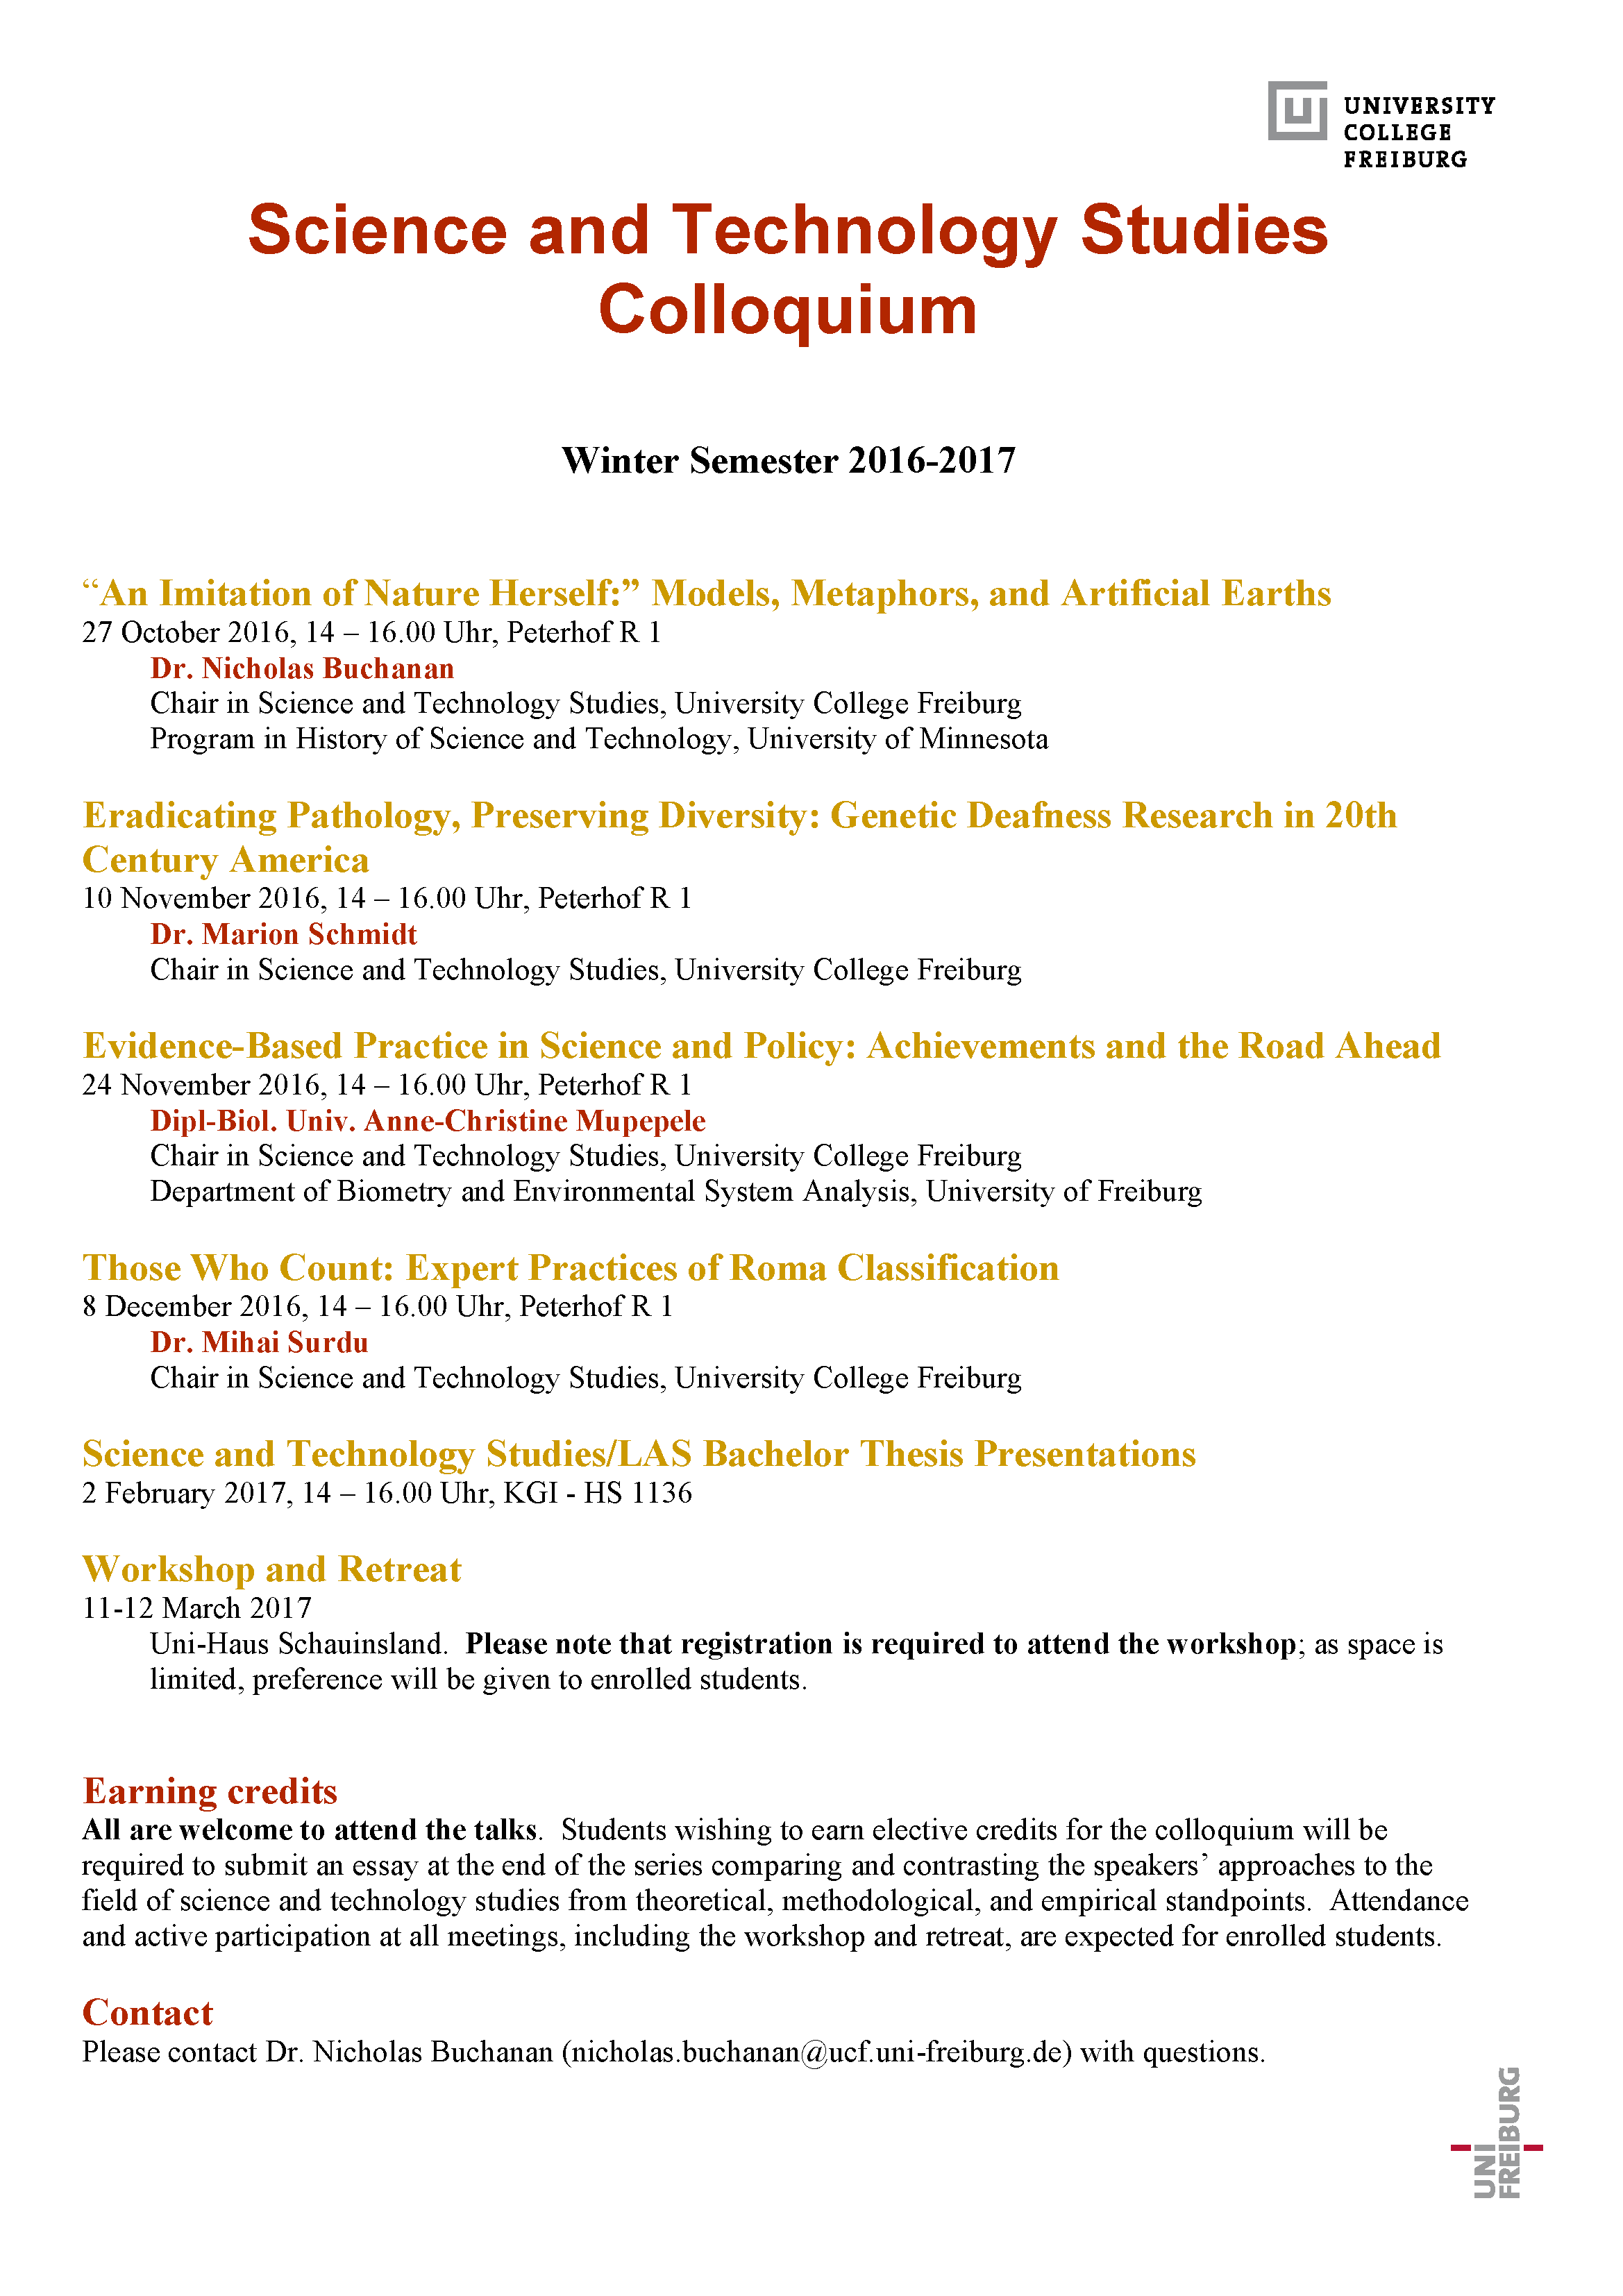 Science and Technology Studies Colloquium WS2016.png